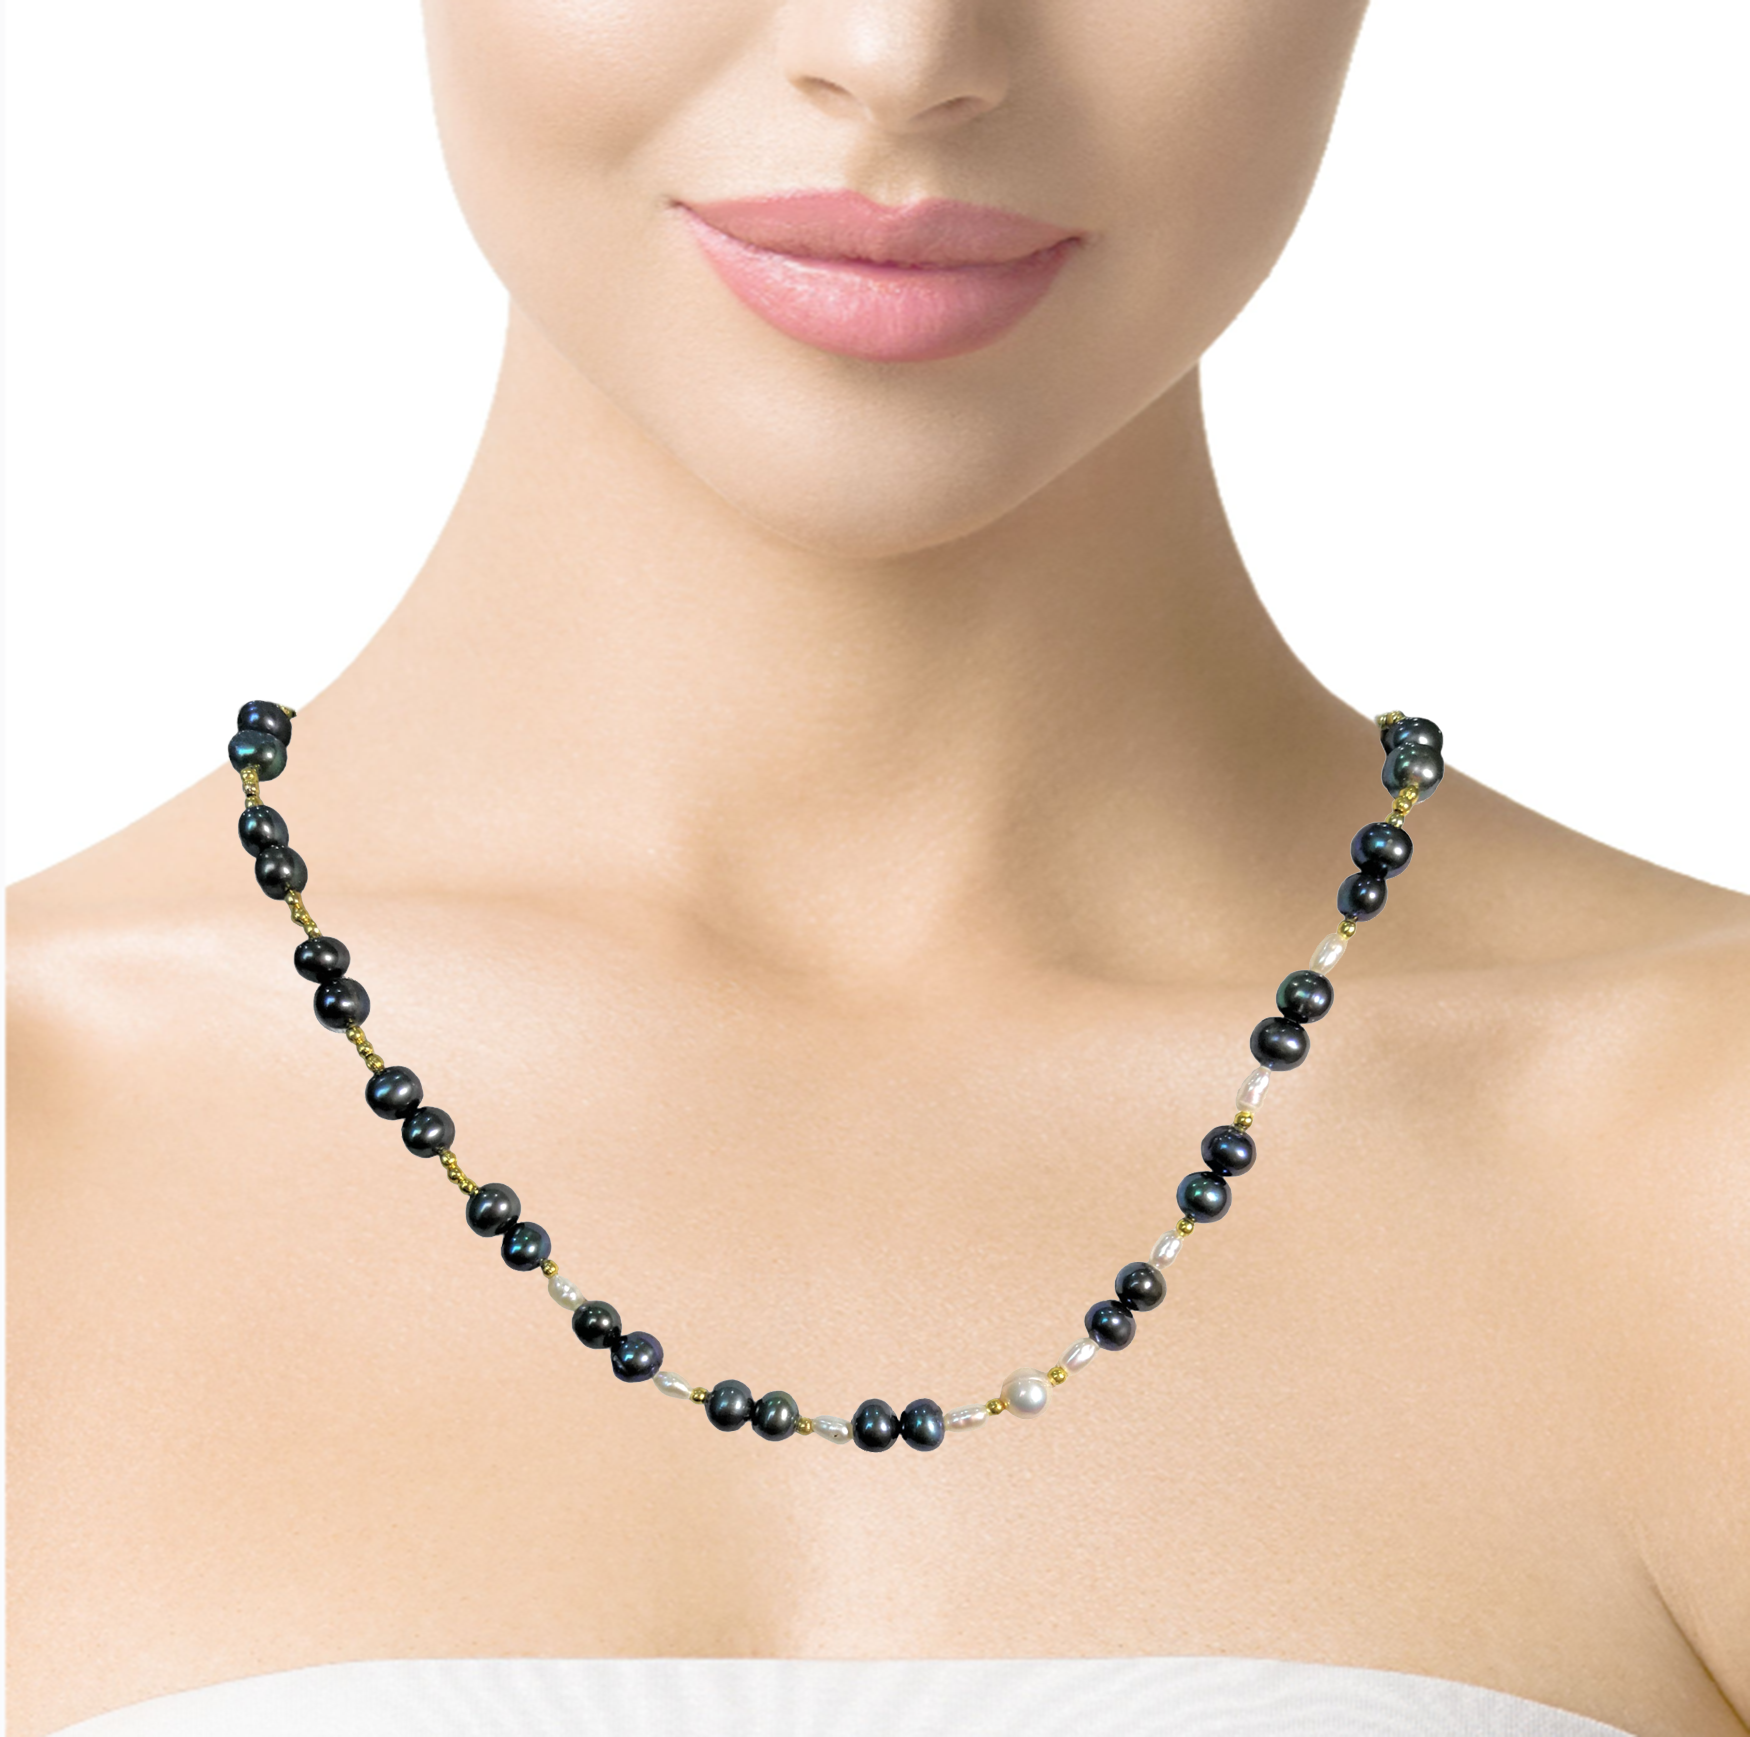 Natural Handmade Necklace 16"-18" Black and White Pearls Gem Beads Jewelry